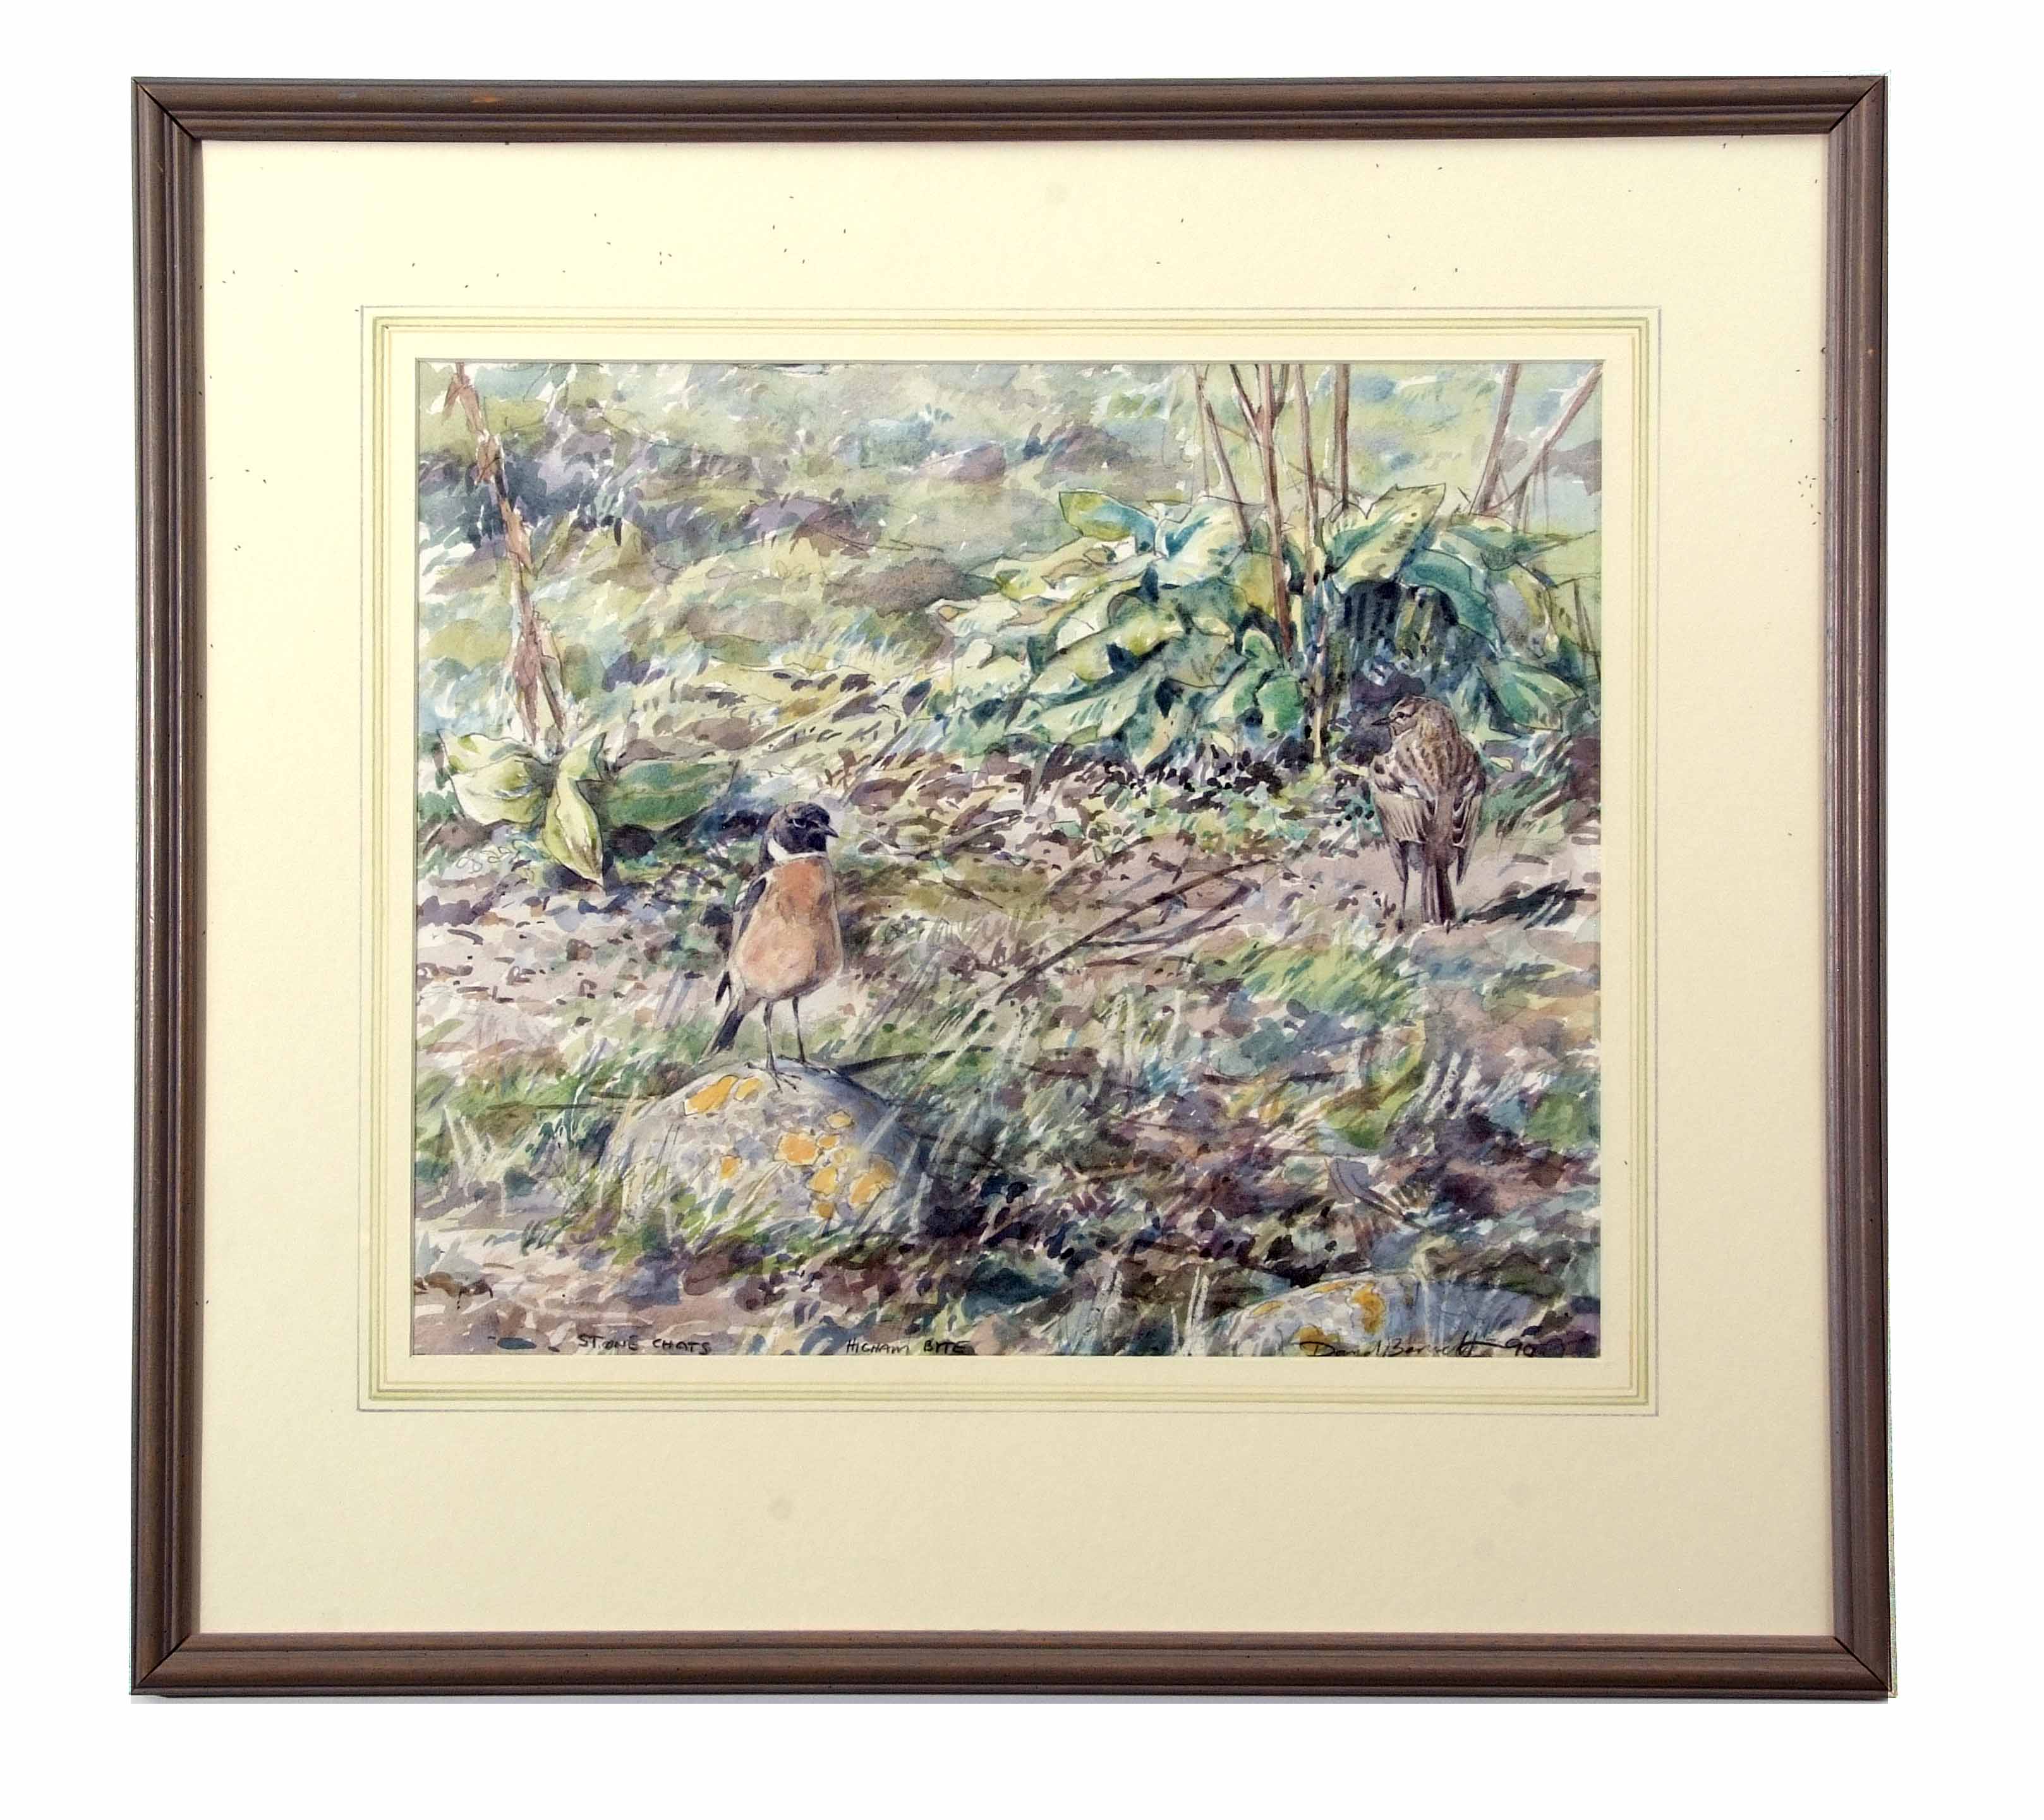 AR David Bennett (contemporary), "Stonechats", watercolour, signed and dated 90 lower right, 35 x